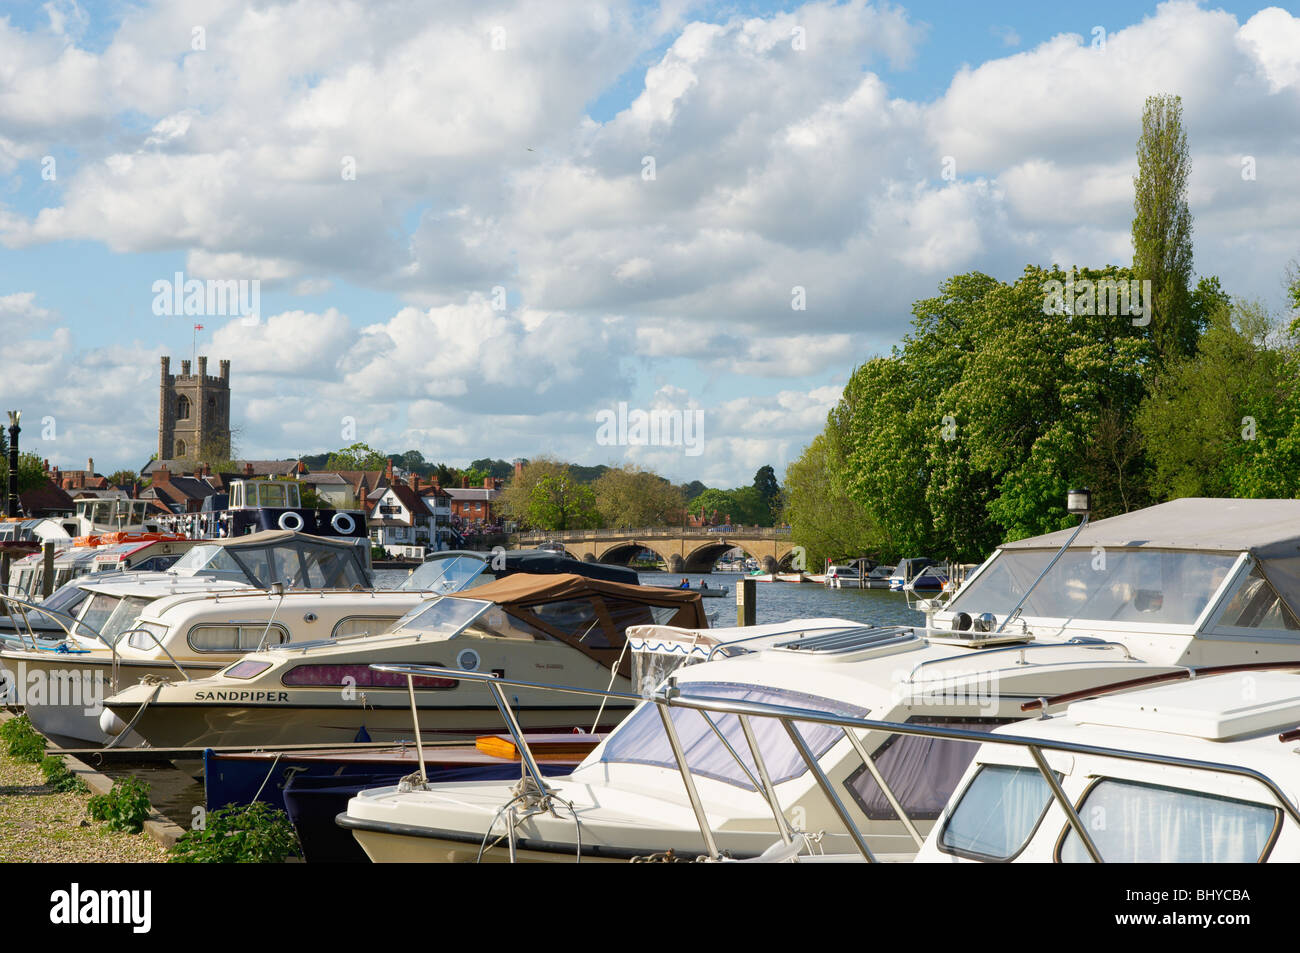 Boats mored on the River Thames at Henley on Thames, Berkshire, England, UK Stock Photo